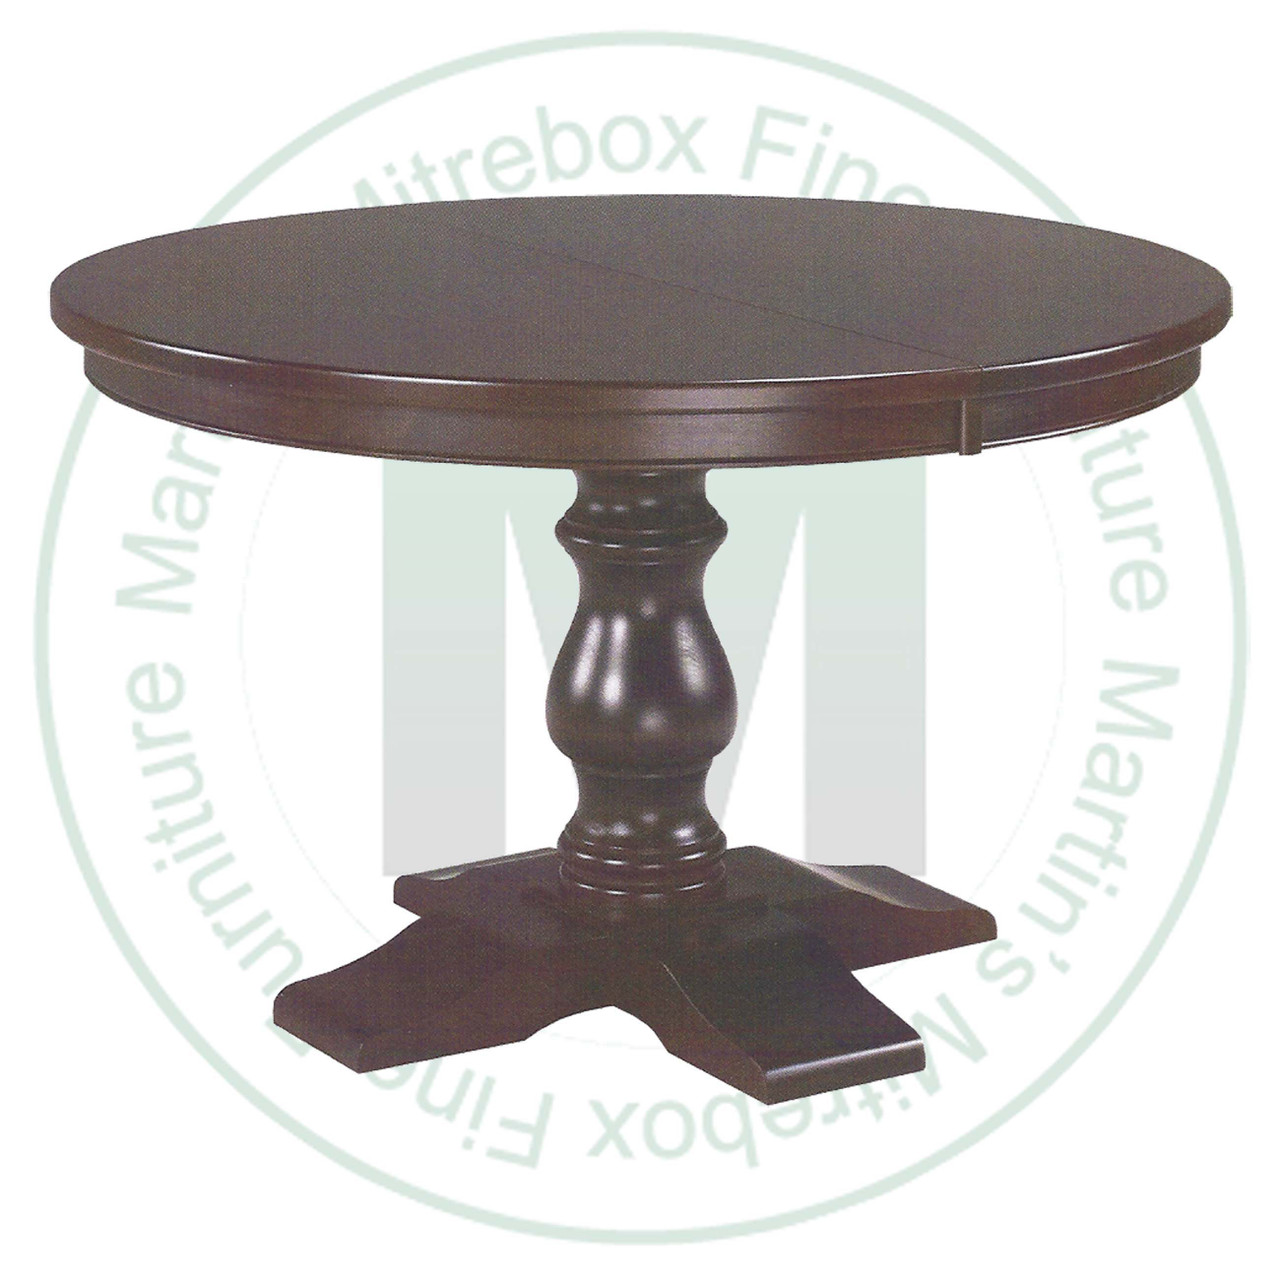 Maple Savannah Single Pedestal Table 36''D x 36''W x 30''H With 2 - 12'' Leaves Table